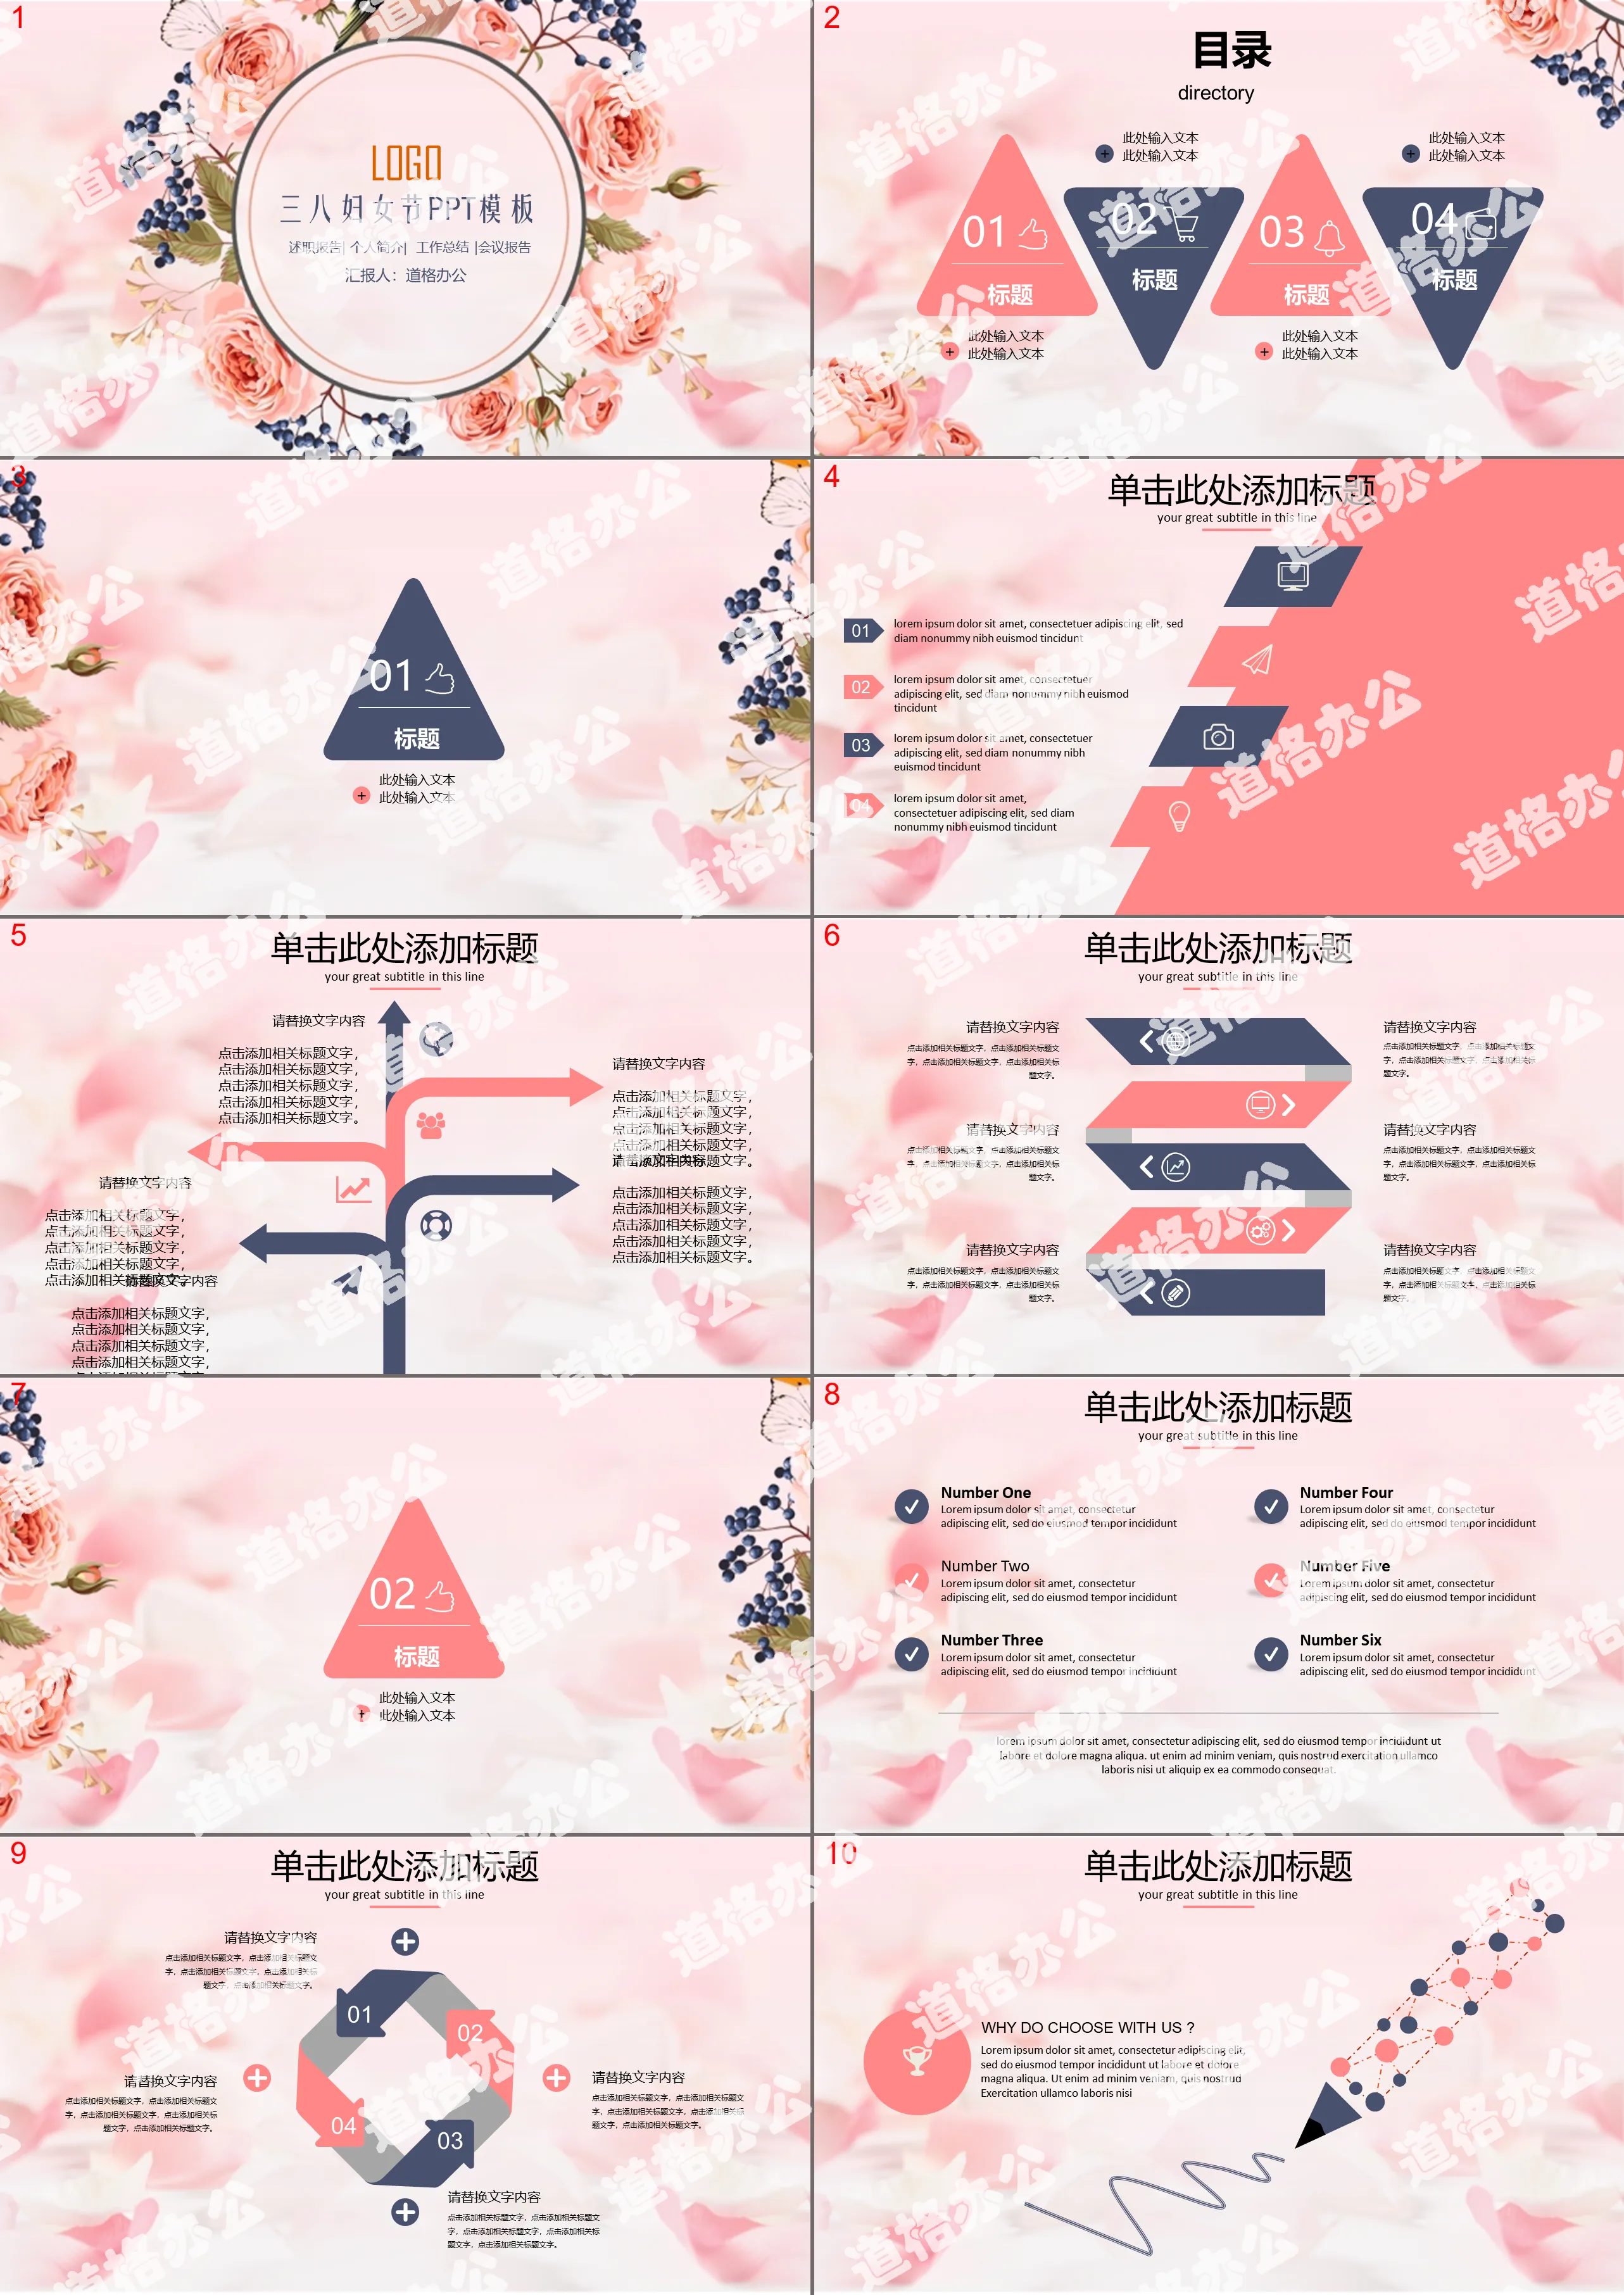 Warm women's day PPT template with retro floral background